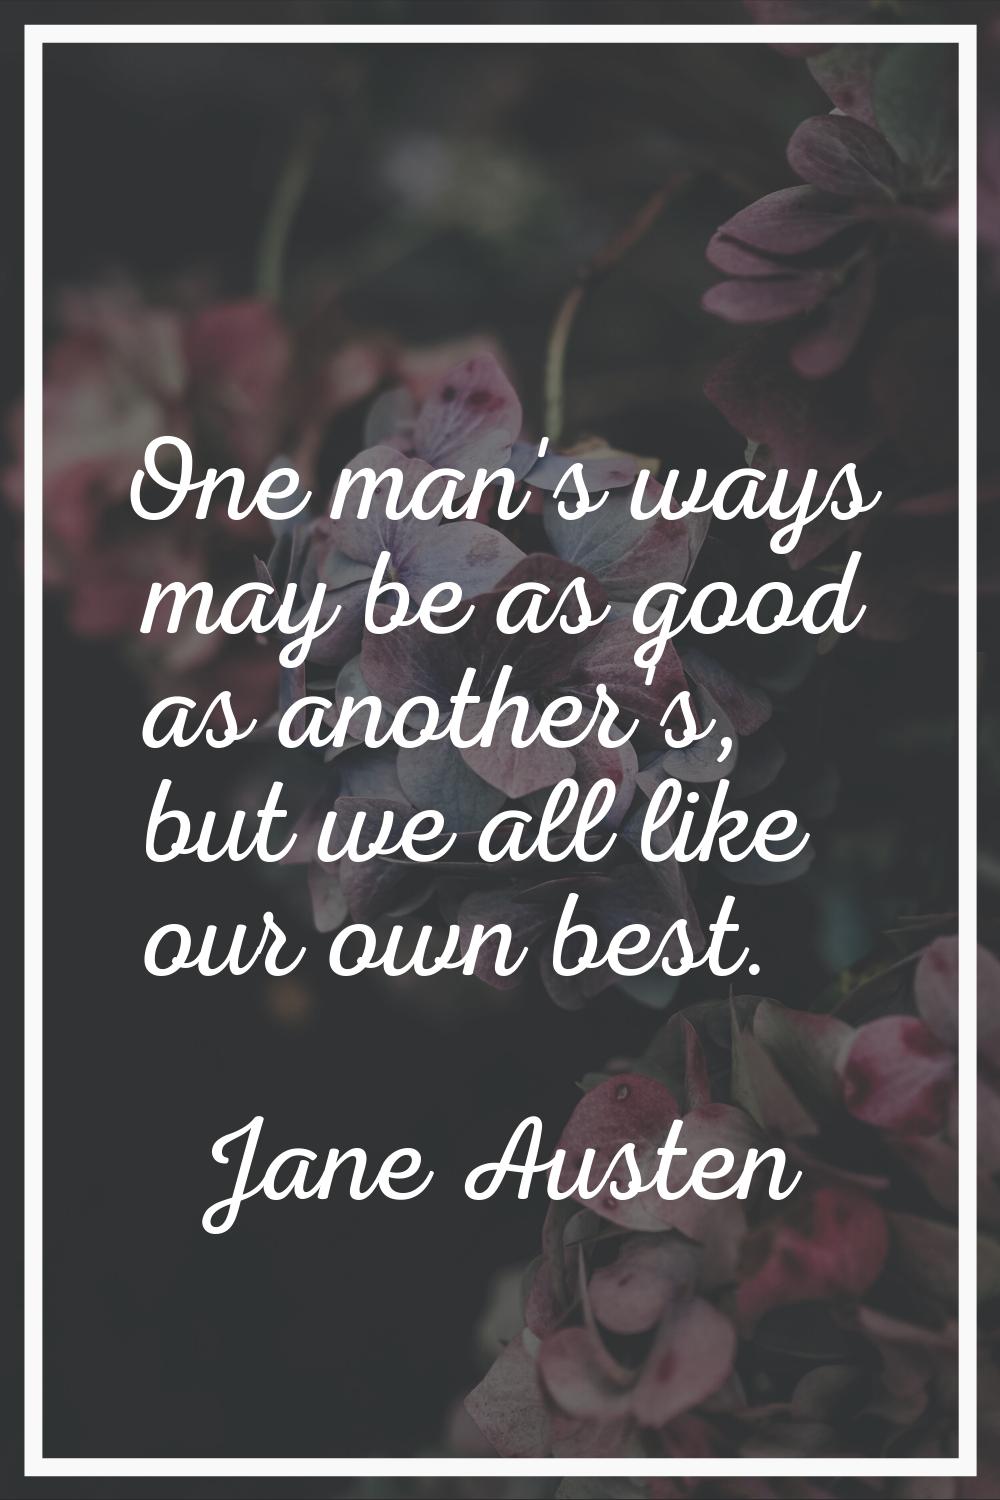 One man's ways may be as good as another's, but we all like our own best.